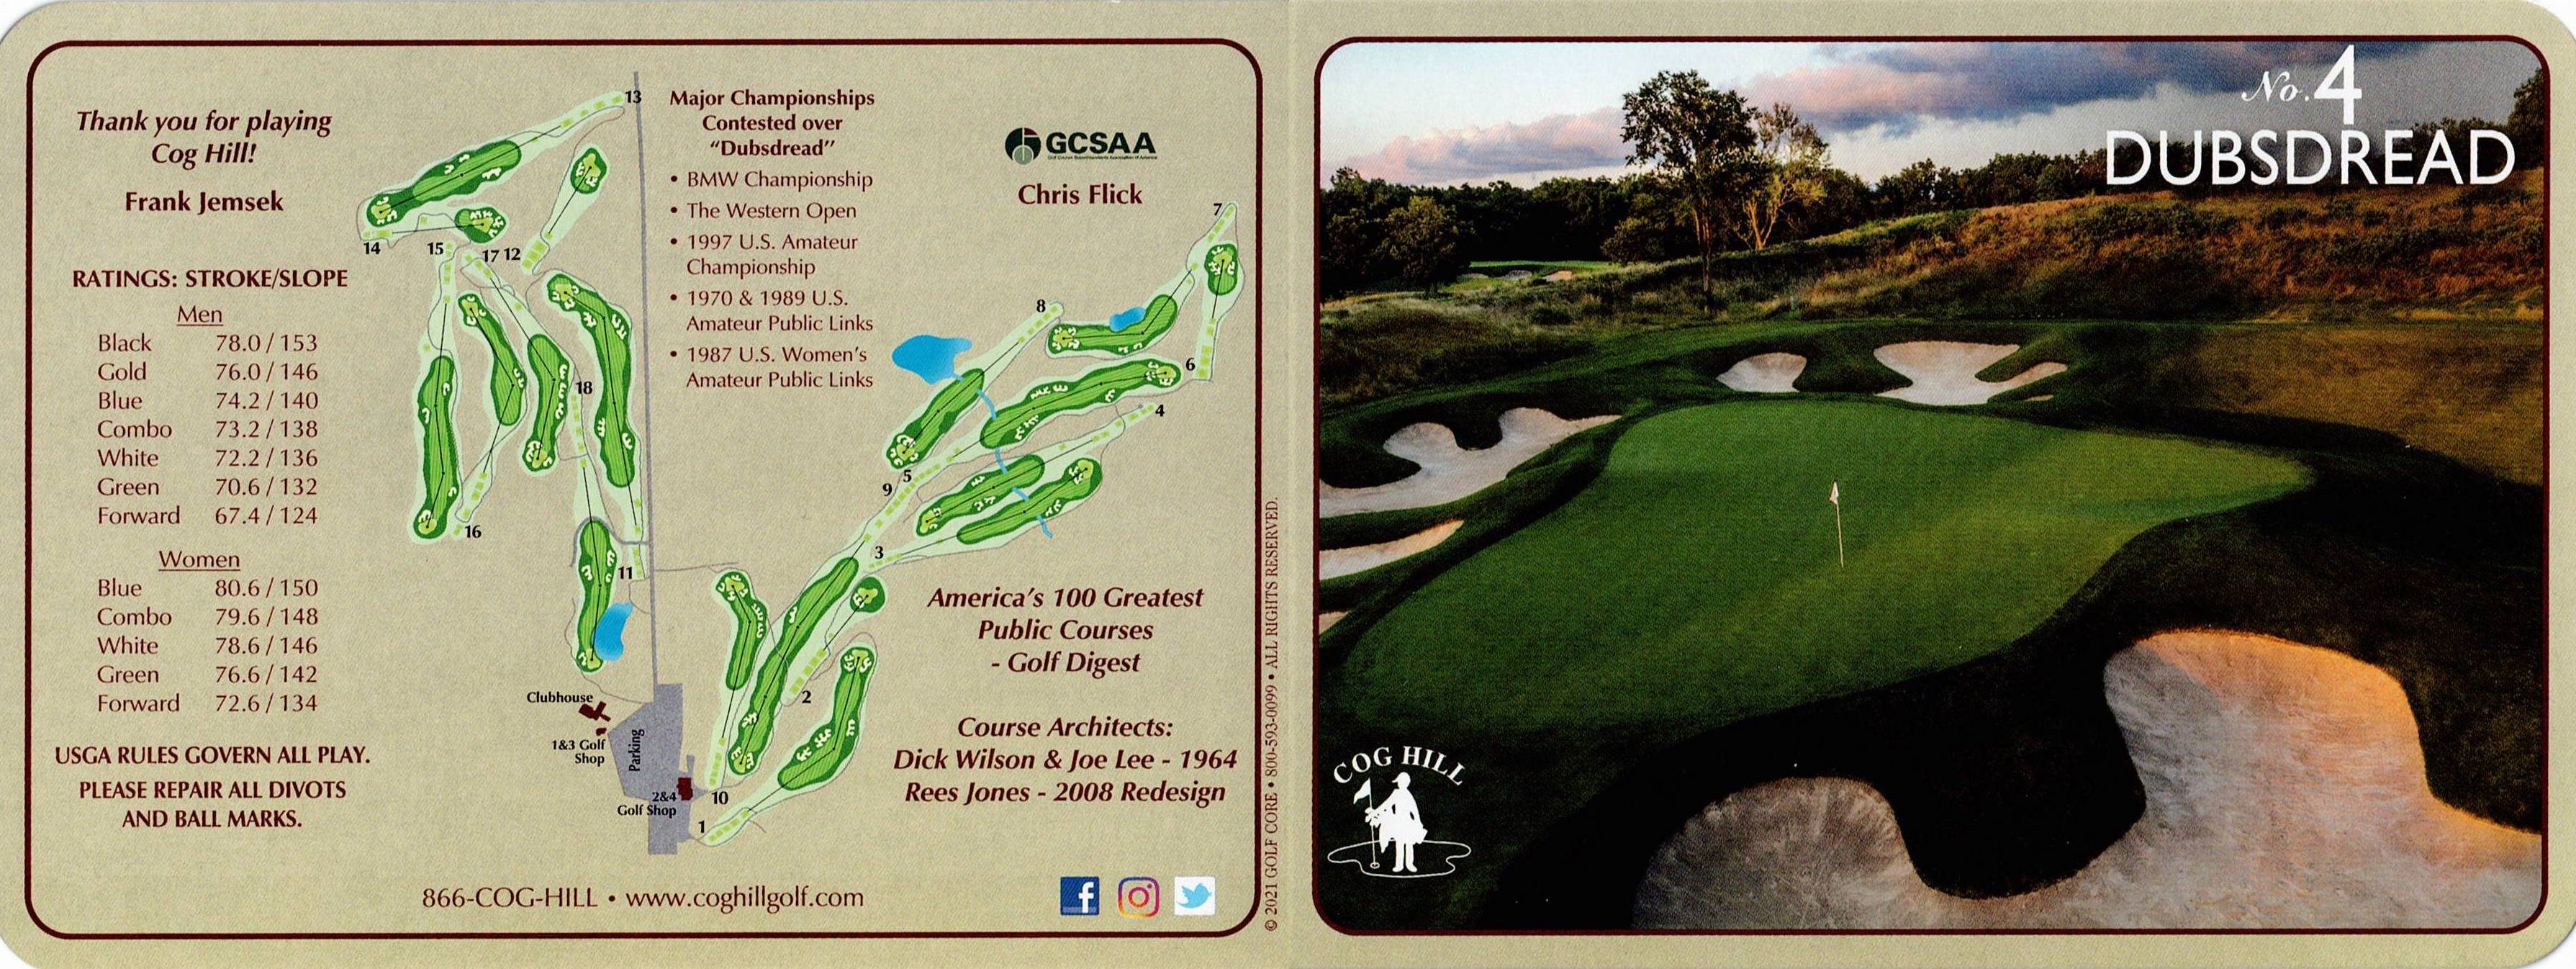 Scan of the scorecard from Cog Hill Course #4 - Dubsdread in Lemont, Illinois. Dubsdread has 6 tee boxes and a combo, hybrid tee box that alternates between the blue and white tees. Note the insane 78.0 rating and 153 slope from the black tees.